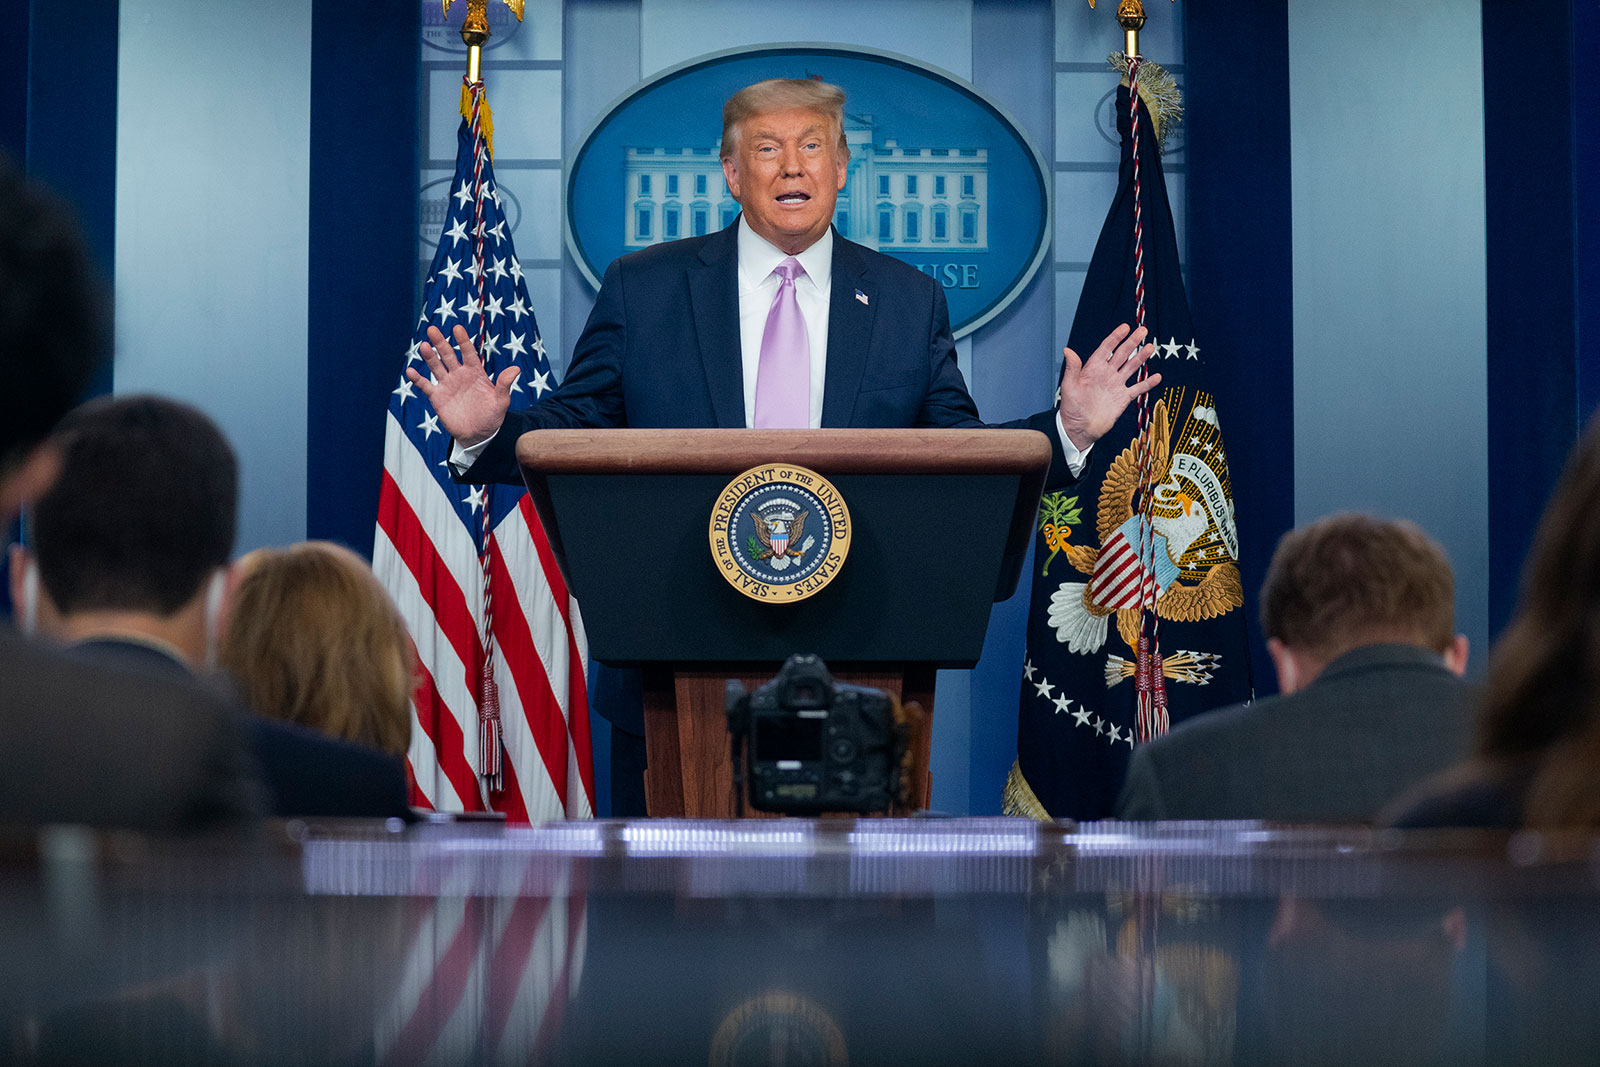 President Trump speaks at a news conference at the White House on Tuesday.